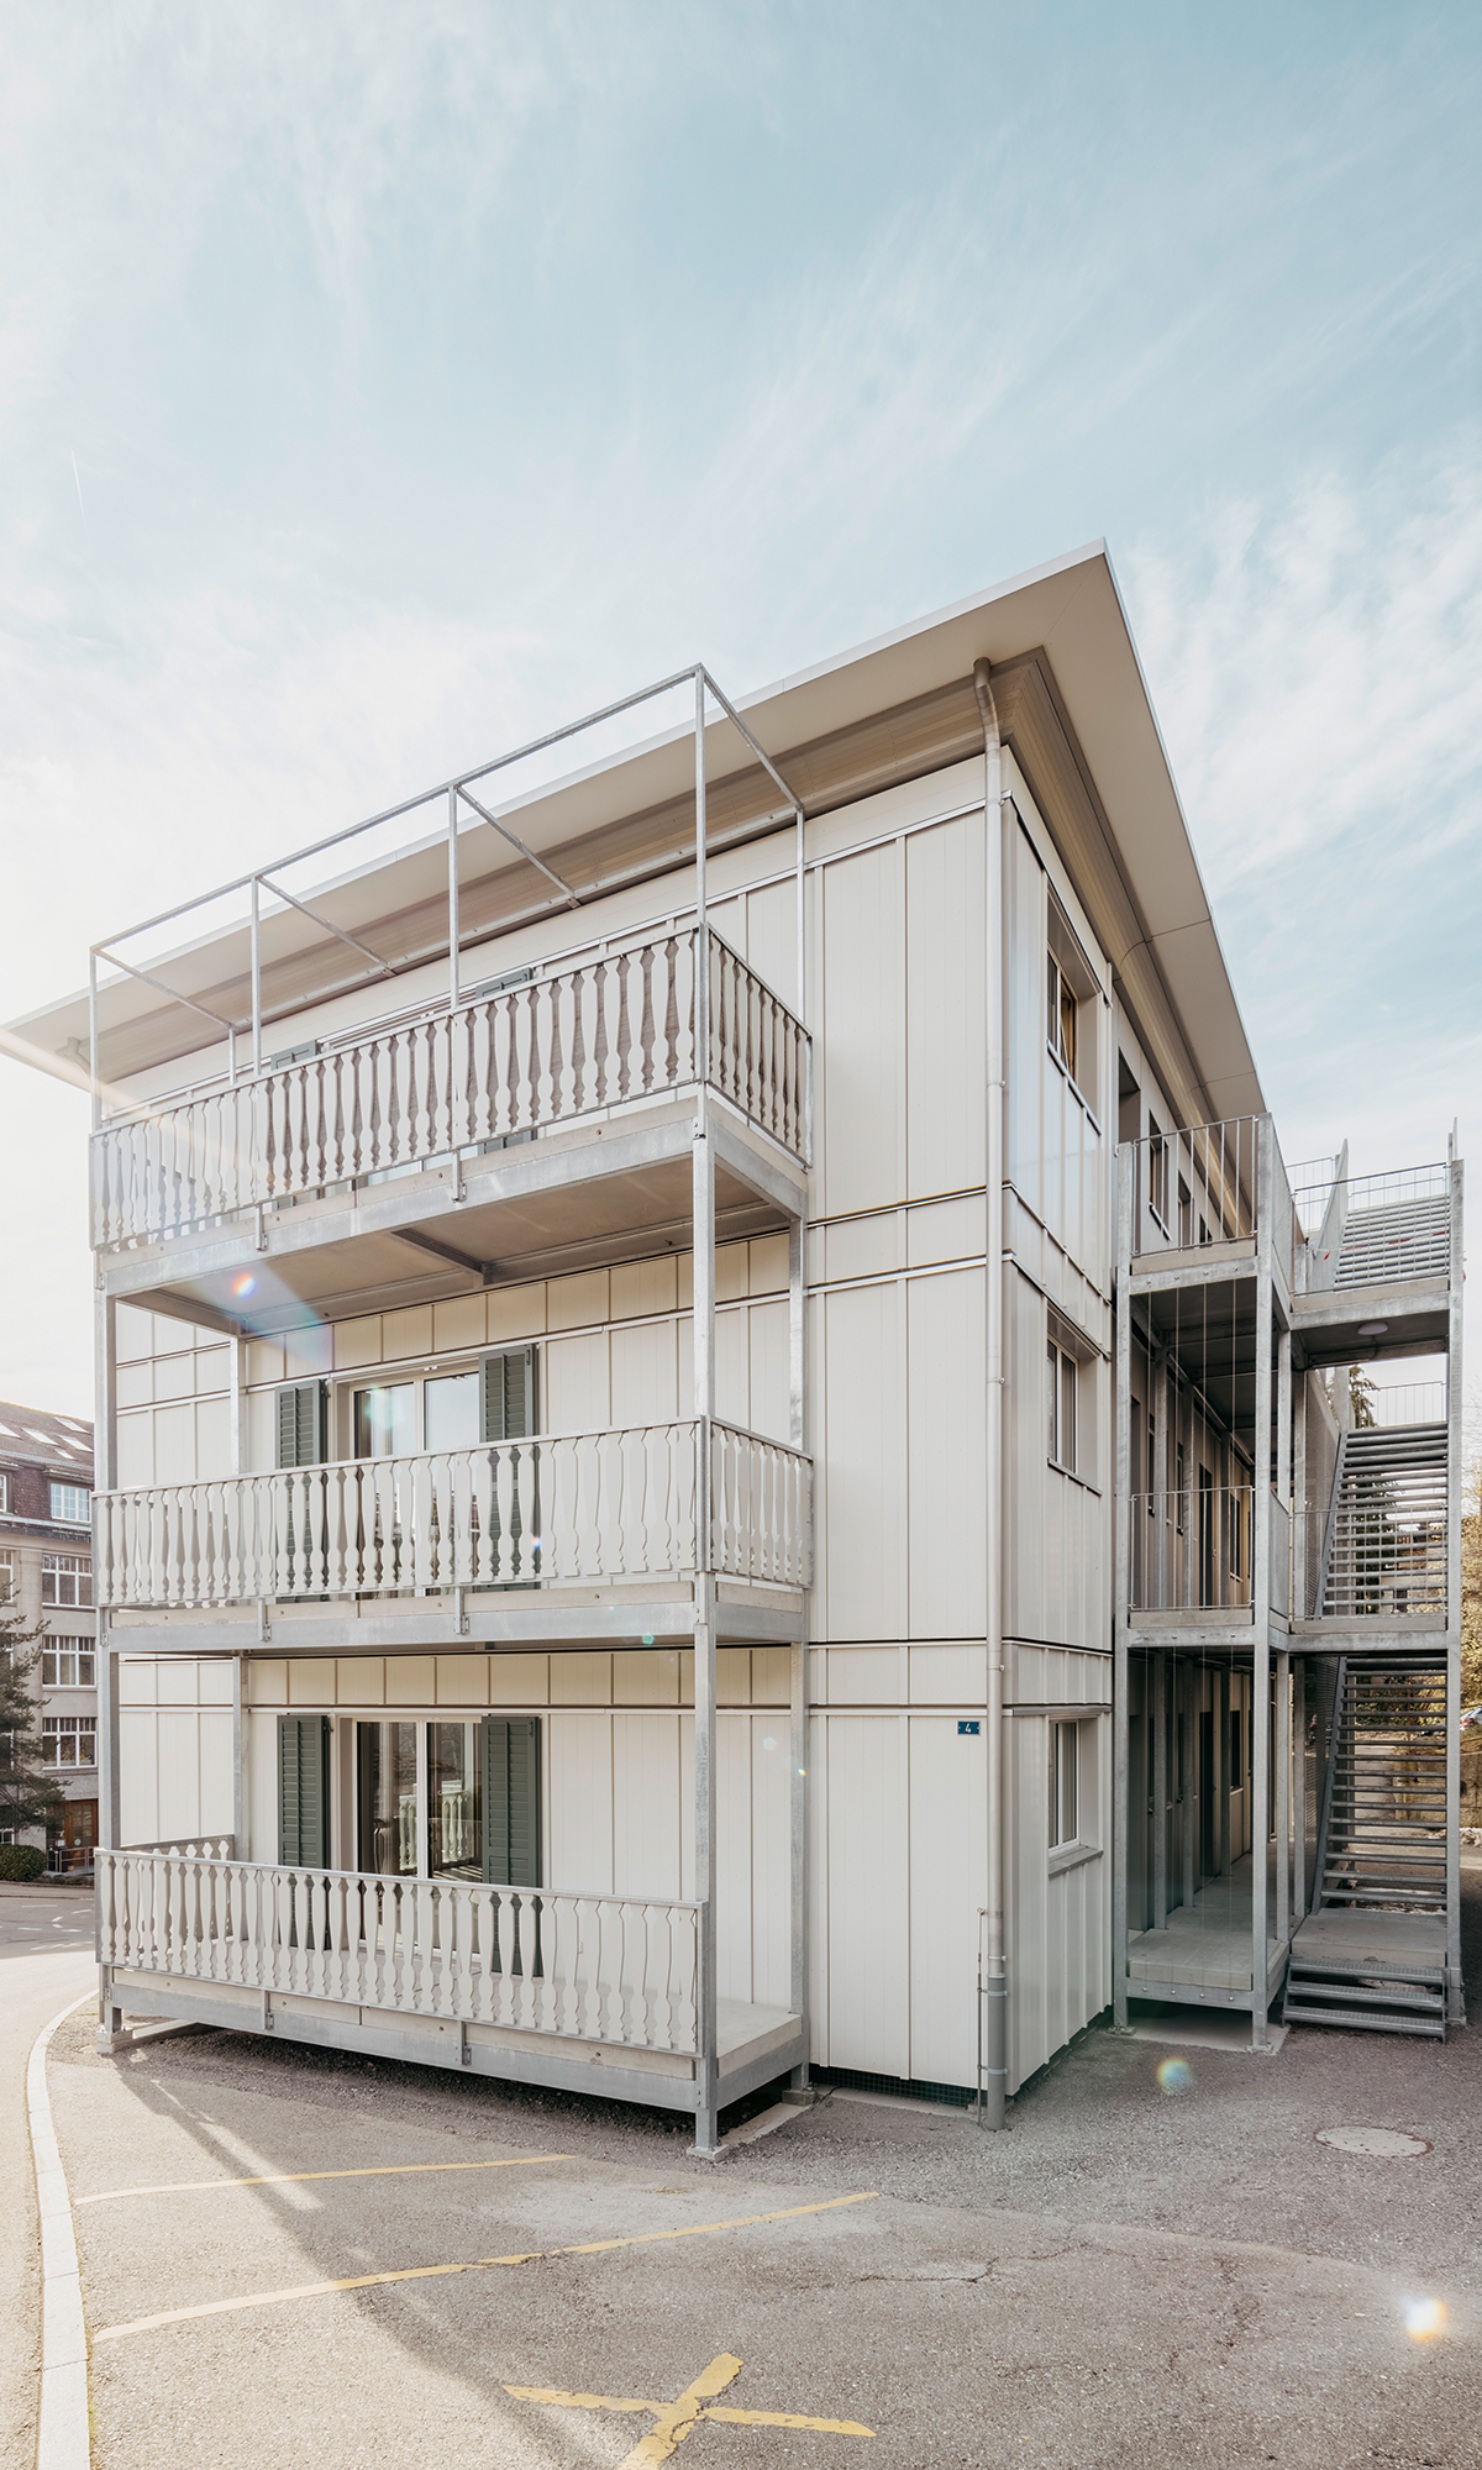 Modular timber construction with balconies and external staircase